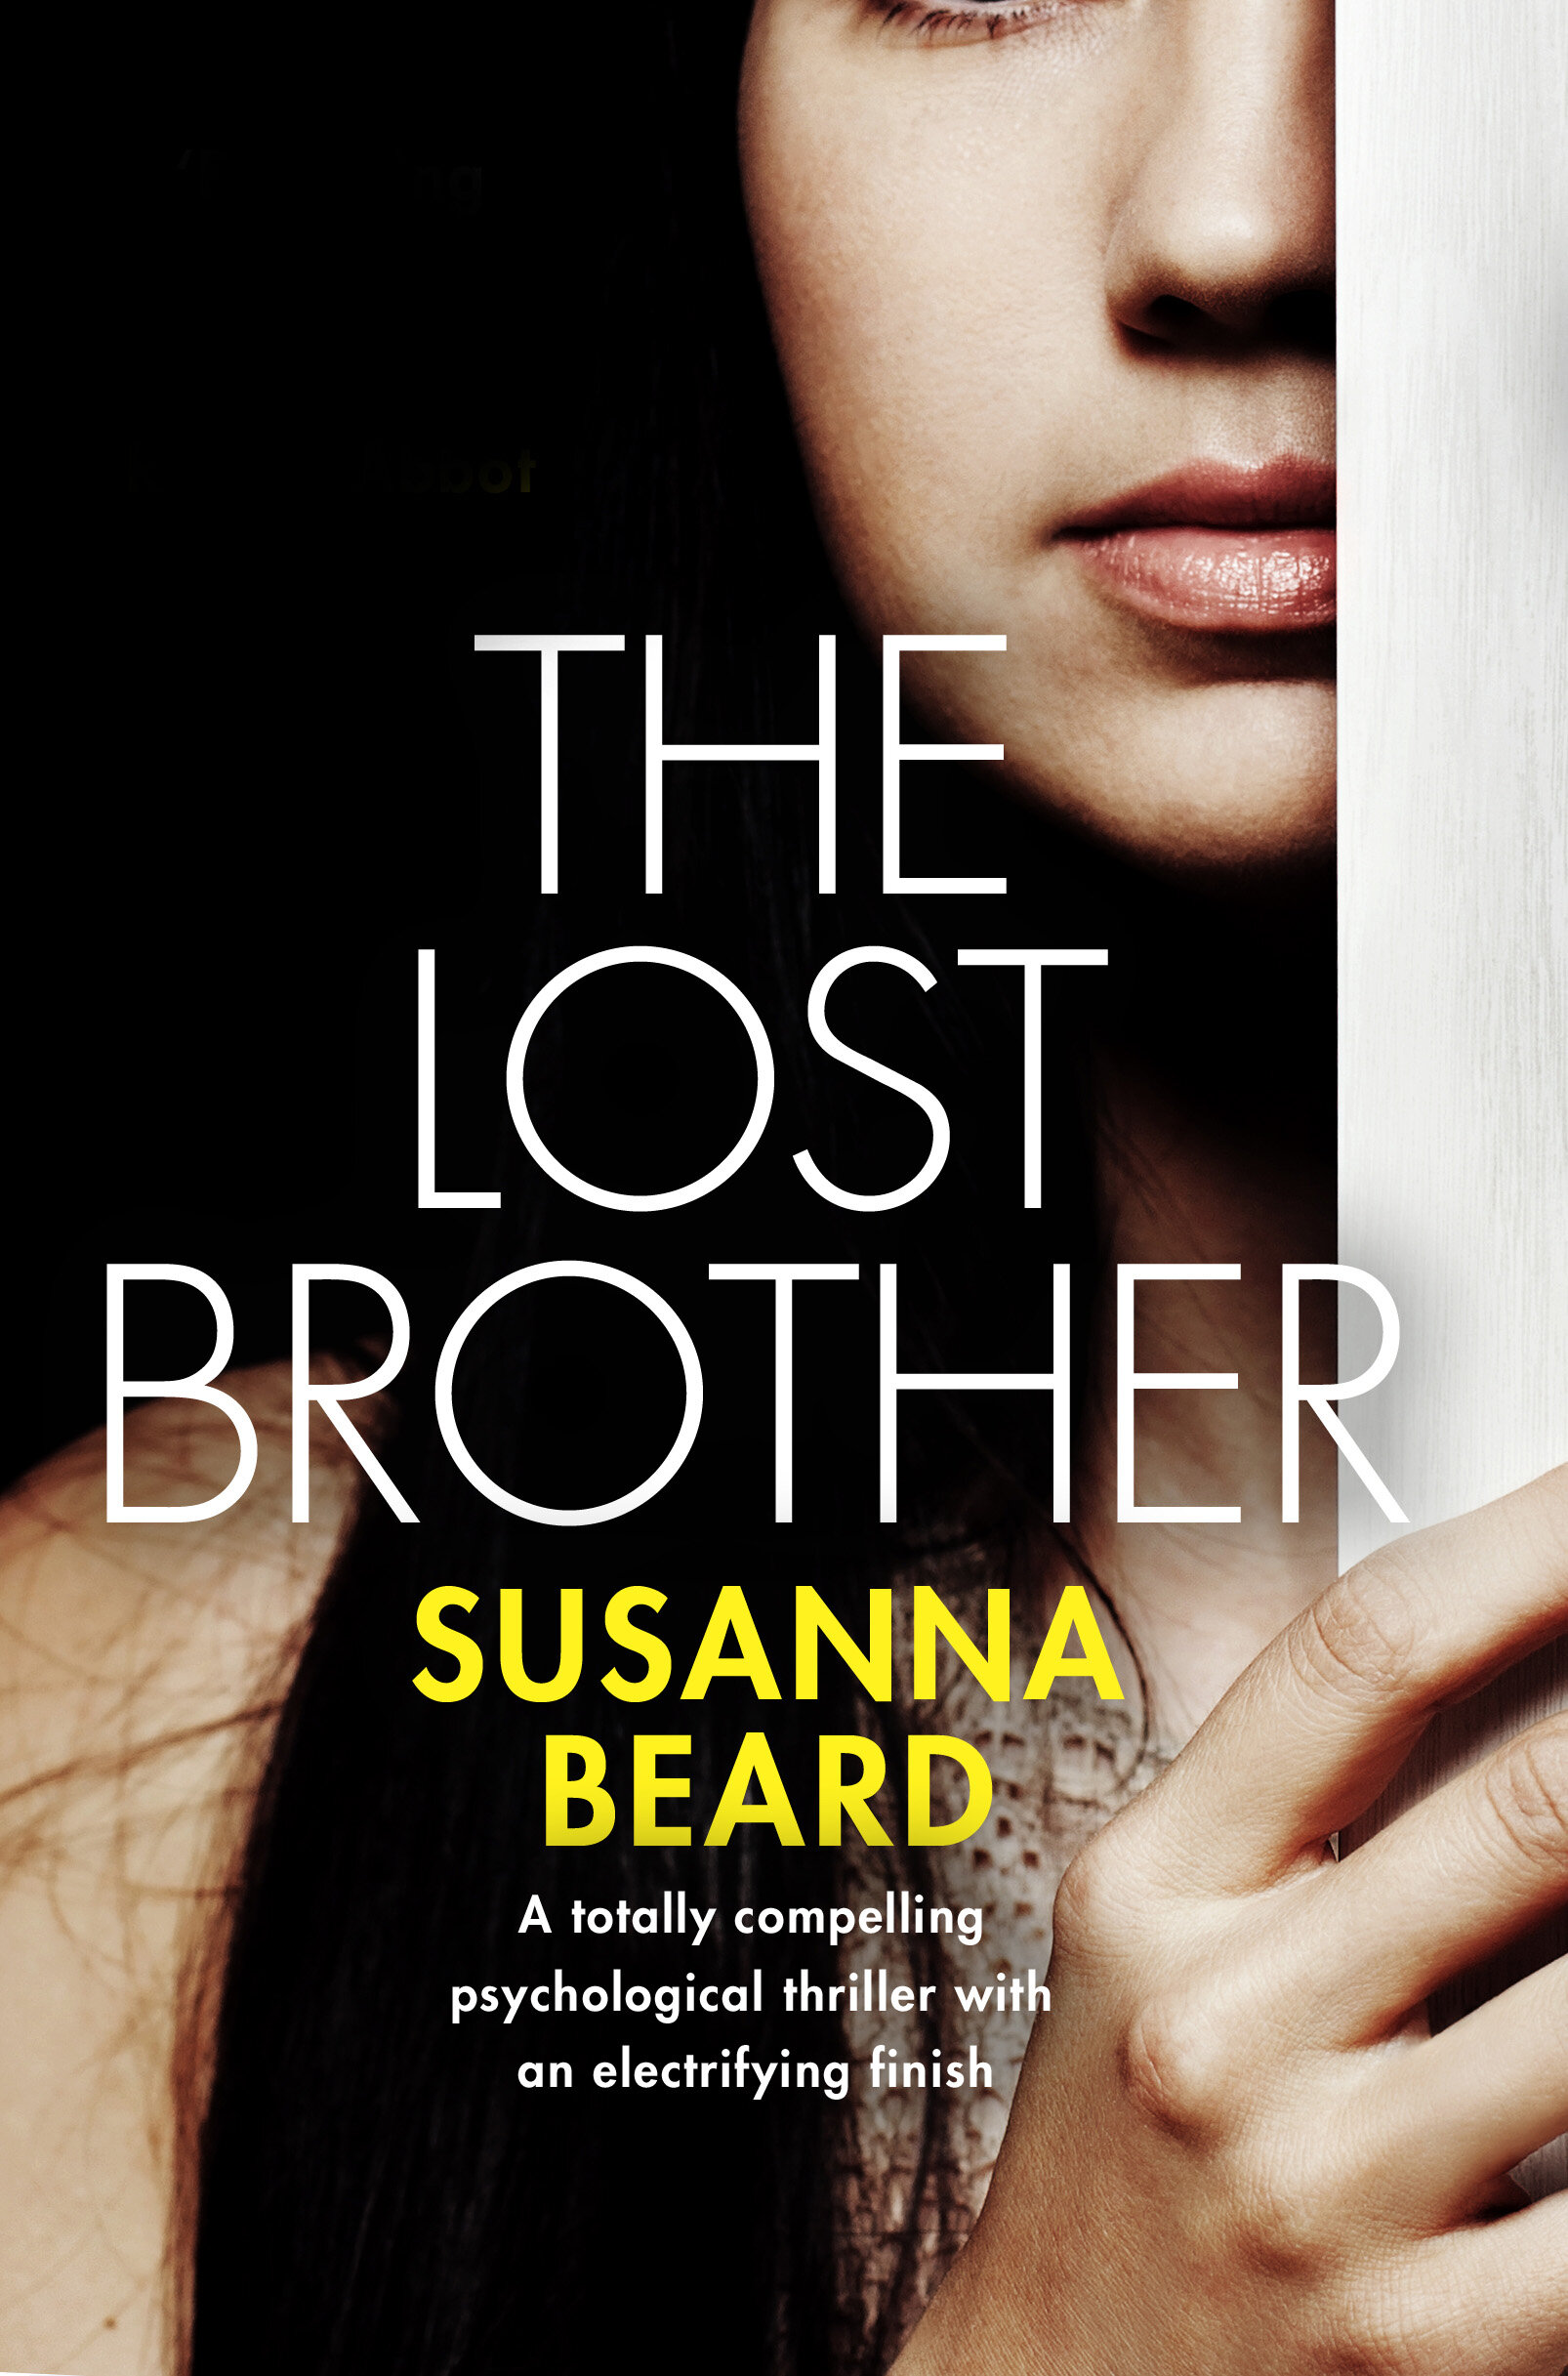 THE LOST BROTHER publish cover CORRECTED.jpg